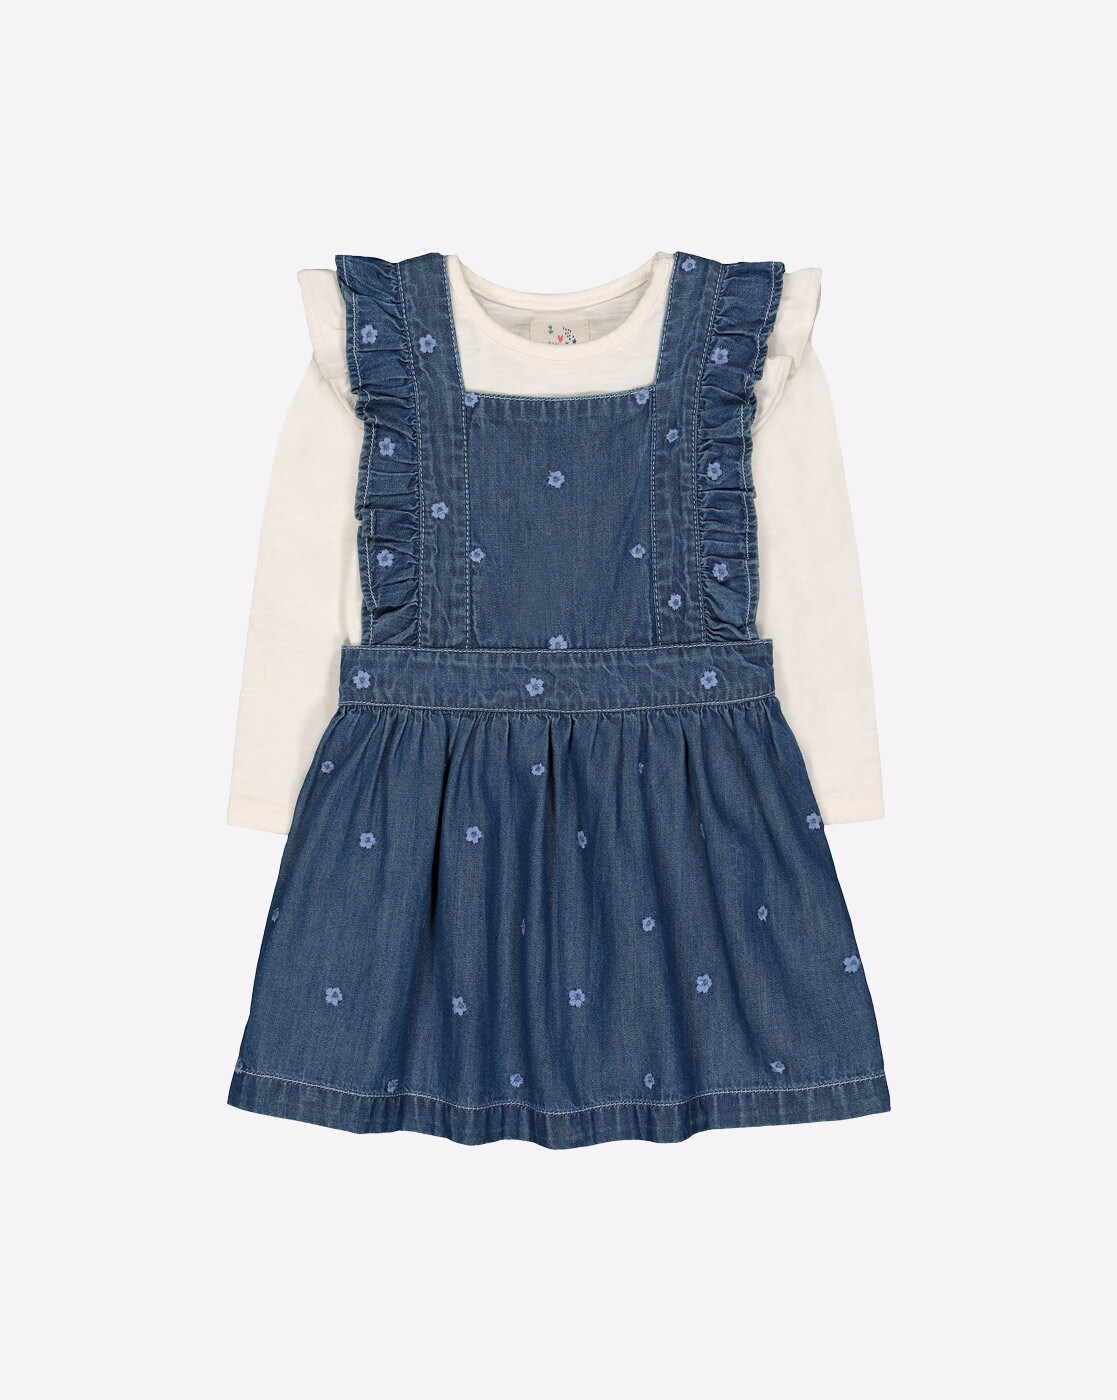 Buy Hand Embroidered Girls Denim Pinafore Dress Online in India - Etsy